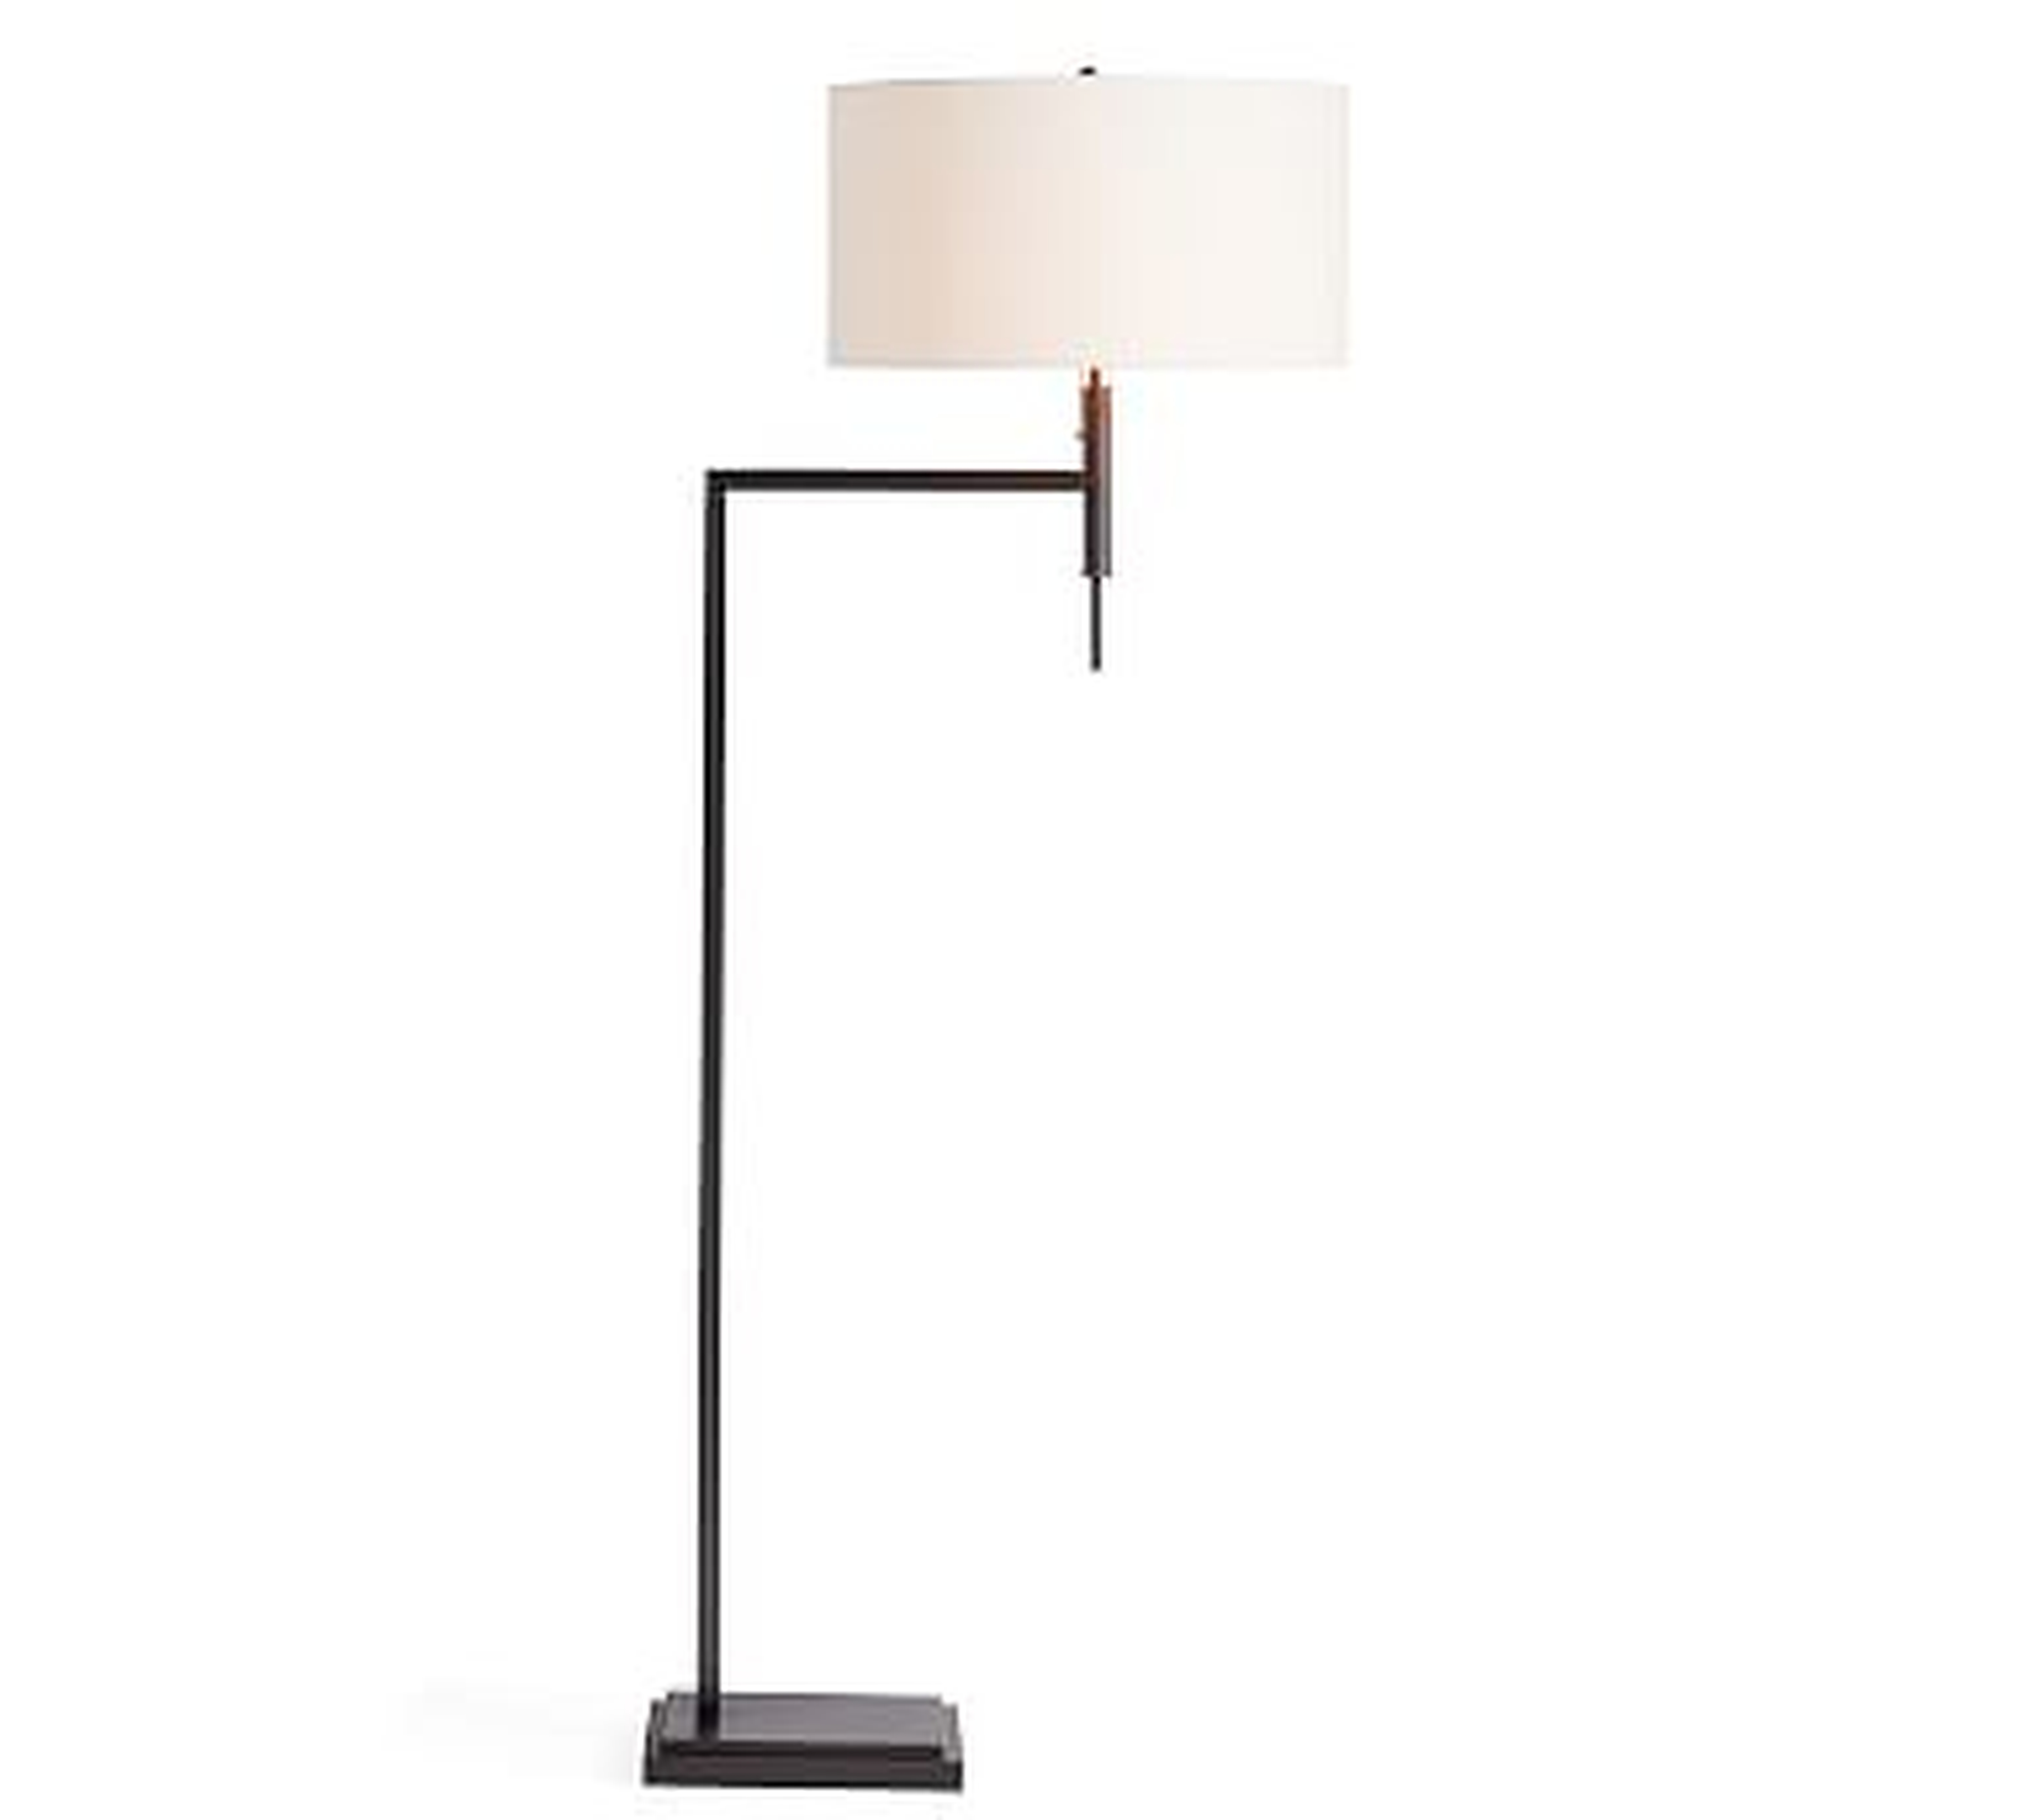 Atticus Metal Sectional Floor Lamp, Bronze with Ivory Shade - Pottery Barn